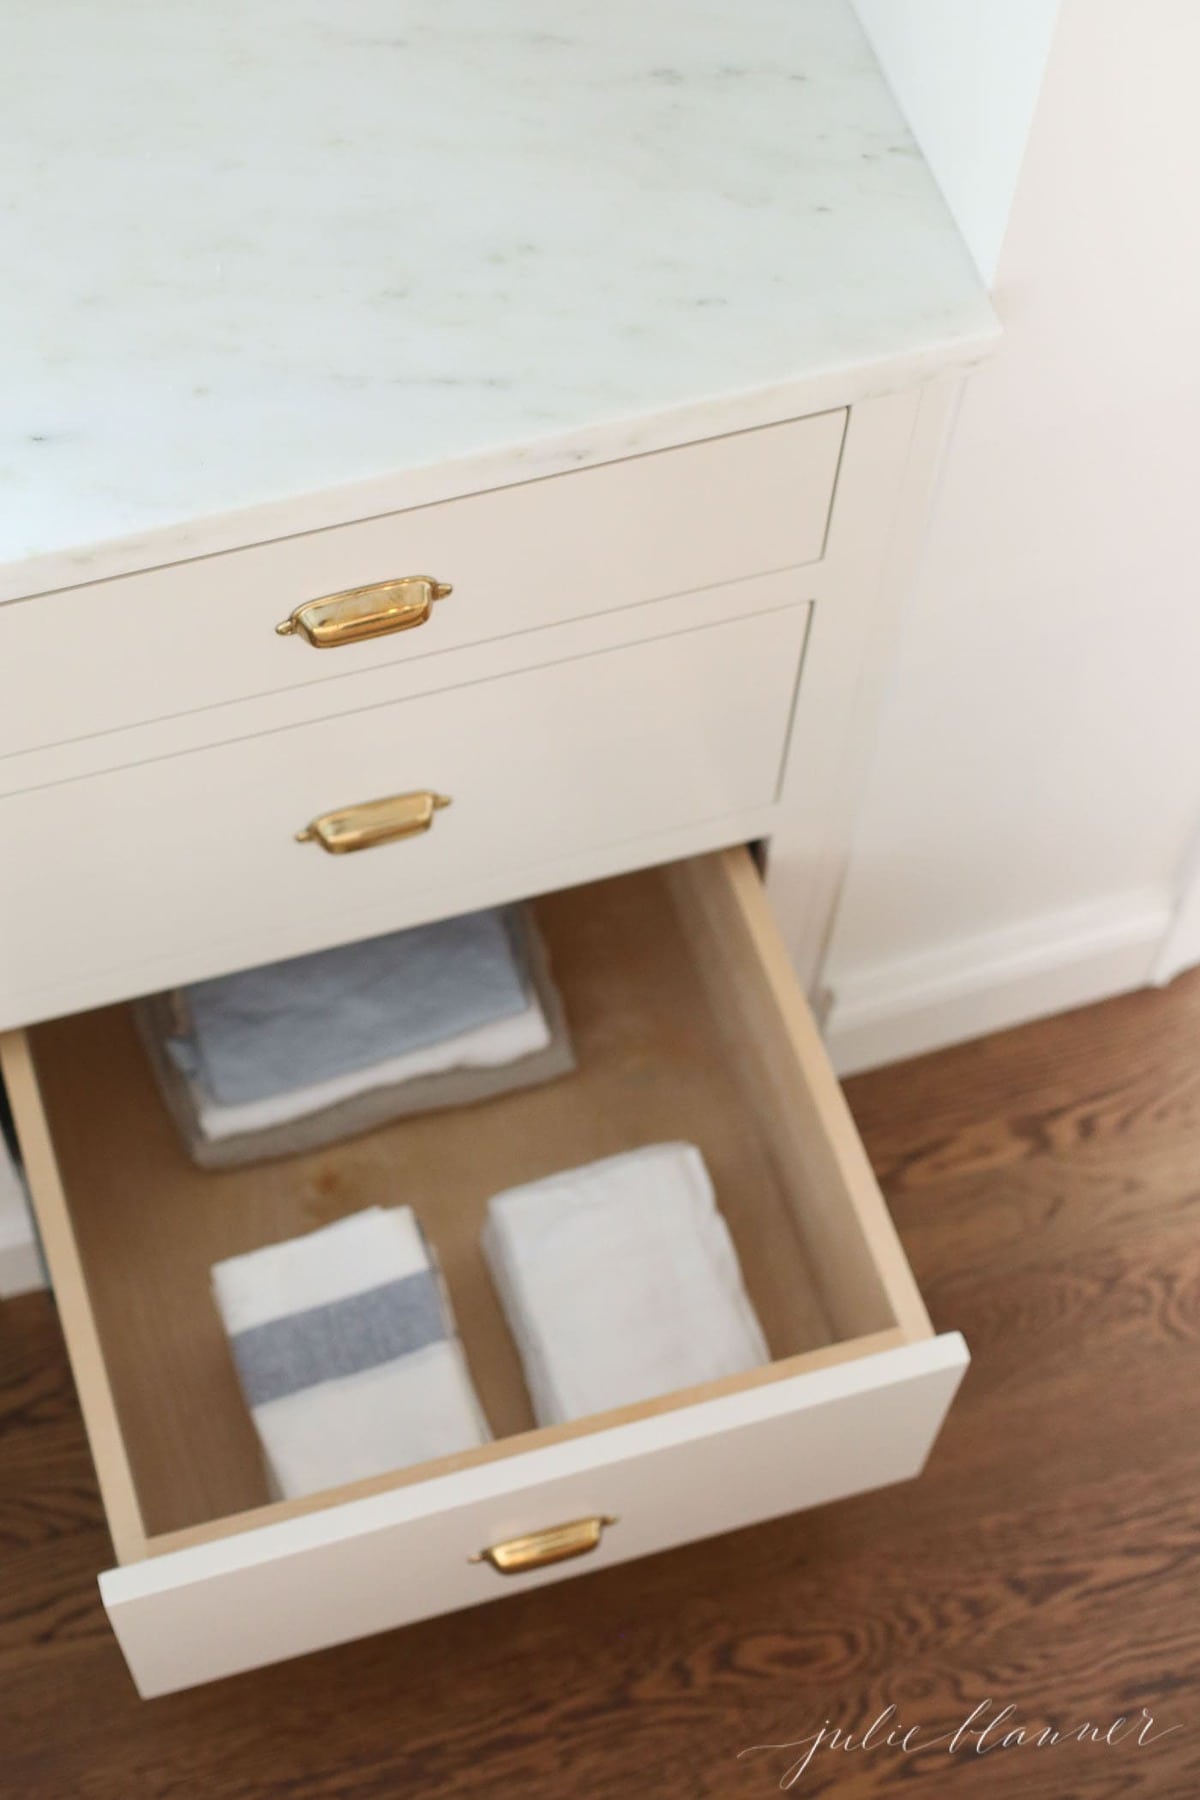 An open drawer in a kitchen with folded towels inside.